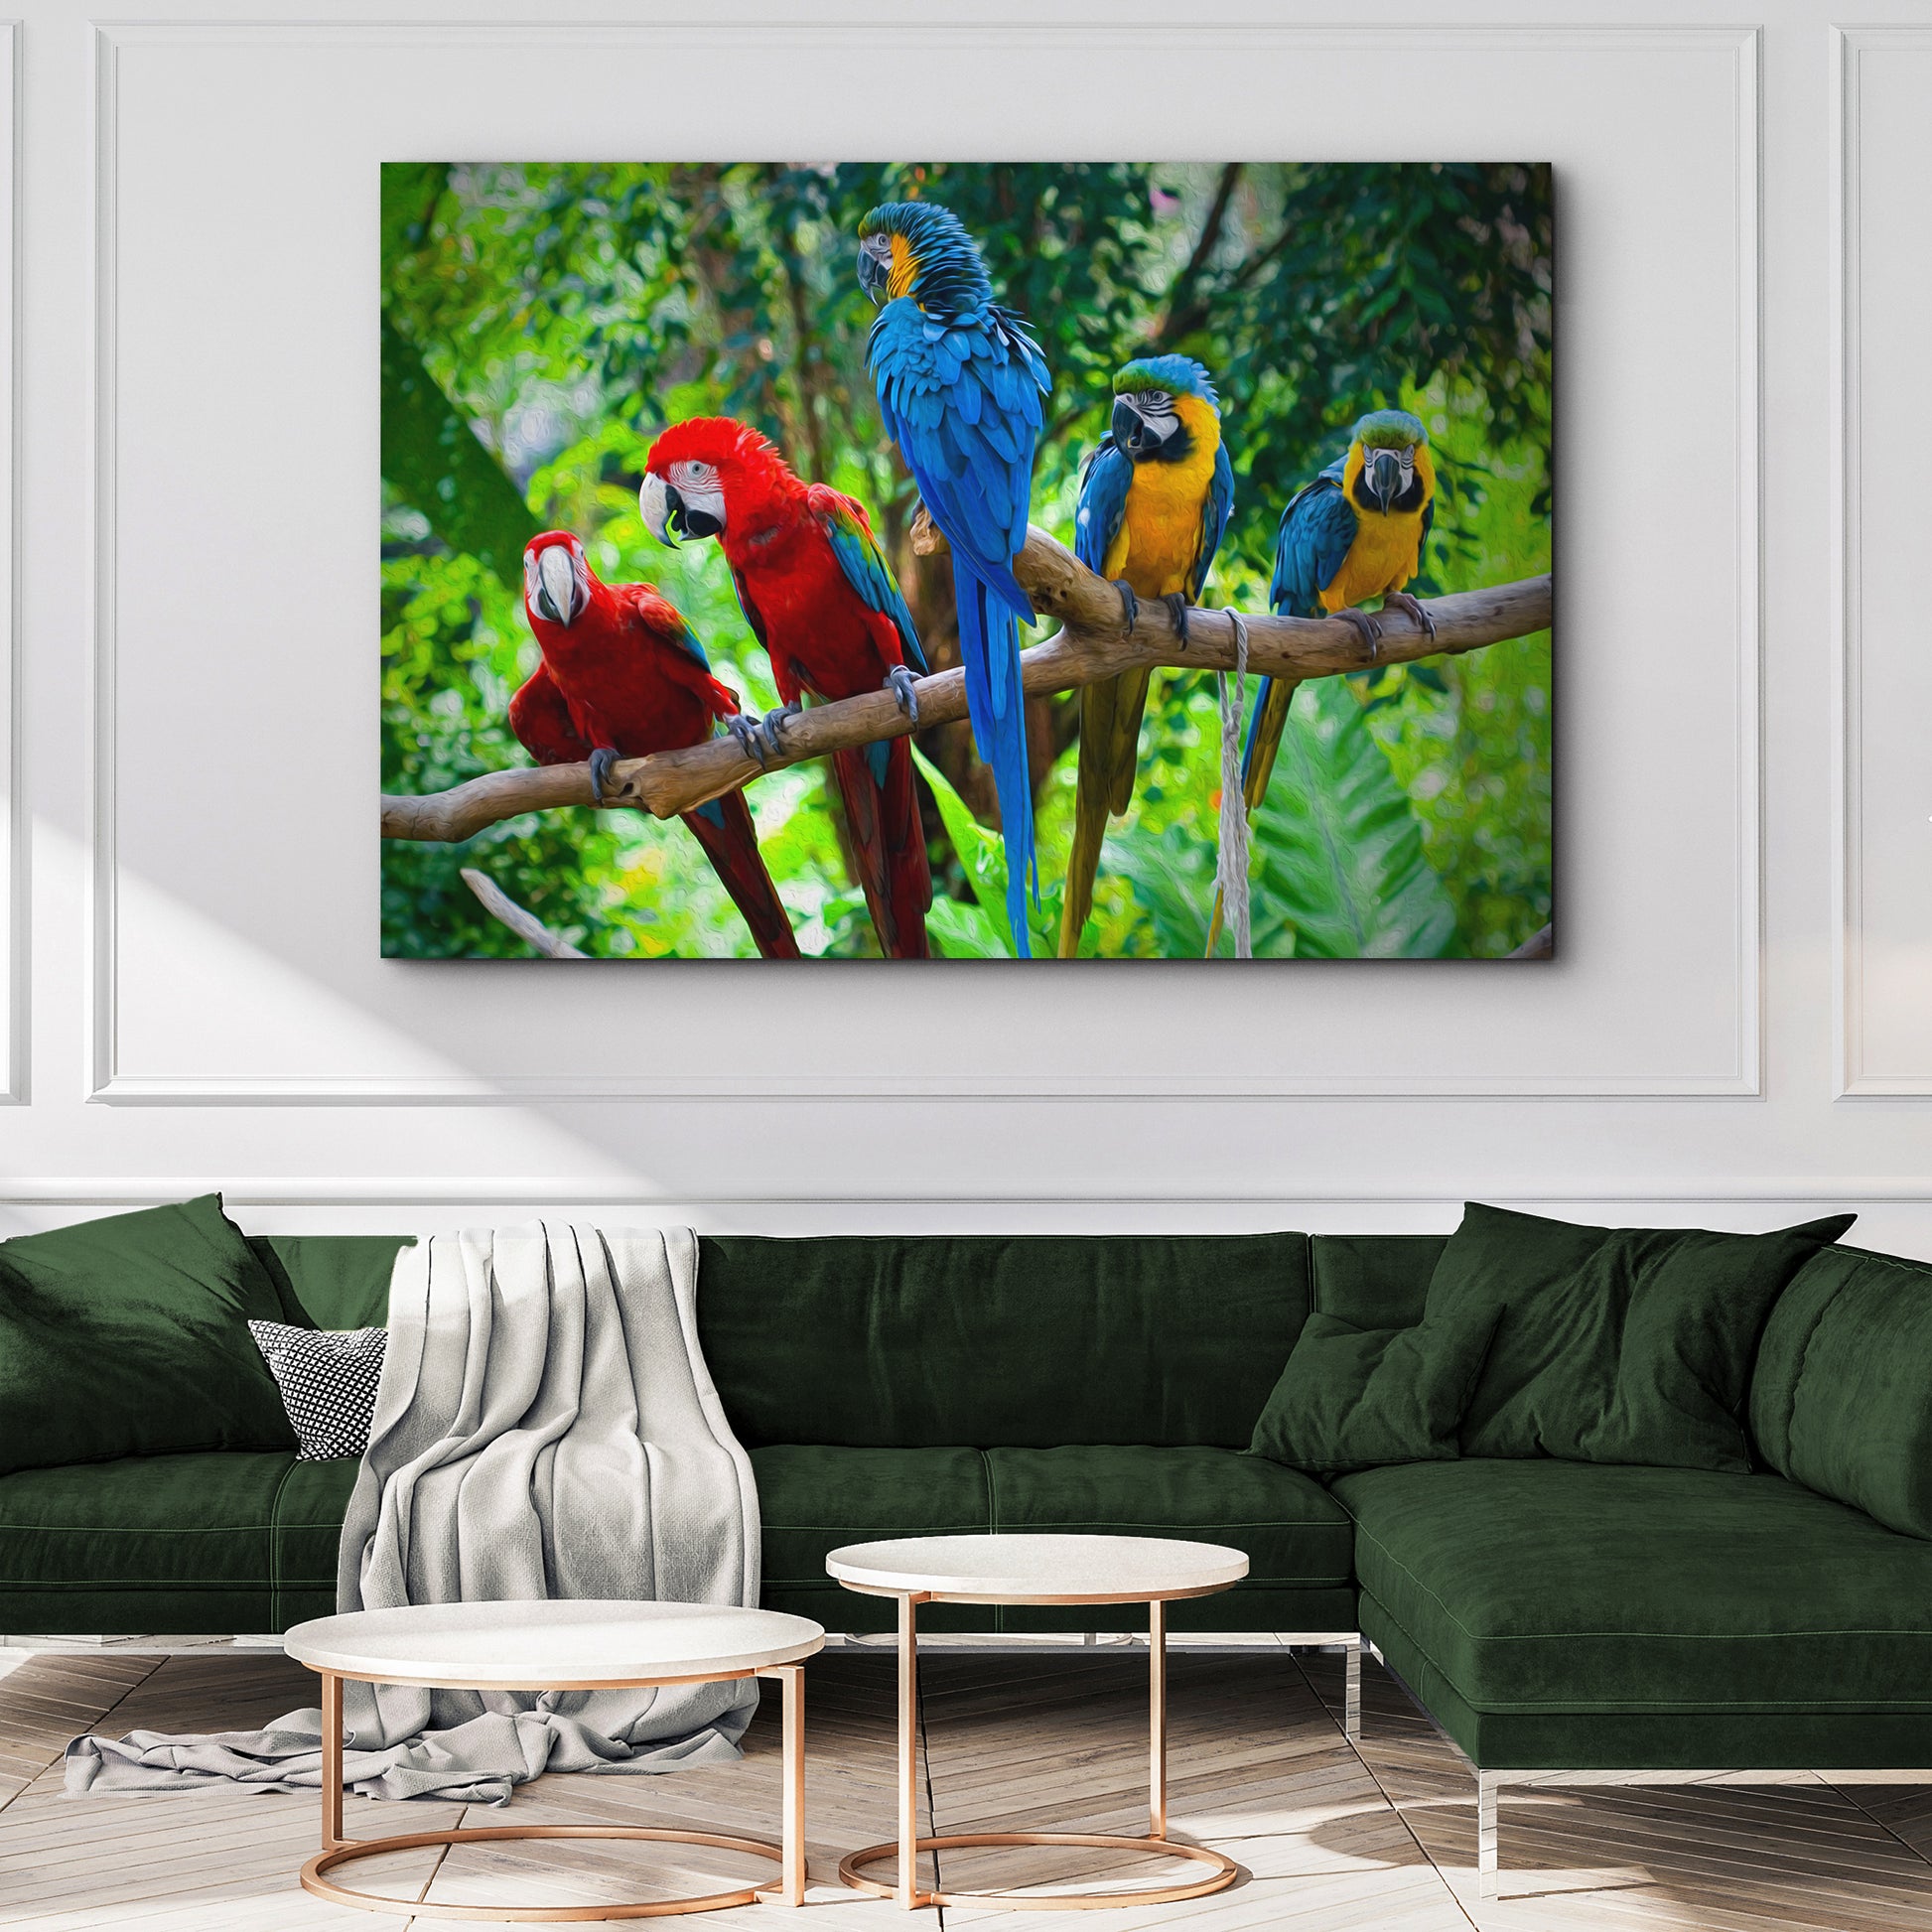 Colorful Parrots On Tree Branch Canvas Wall Art Style 1 - Image by Tailored Canvases